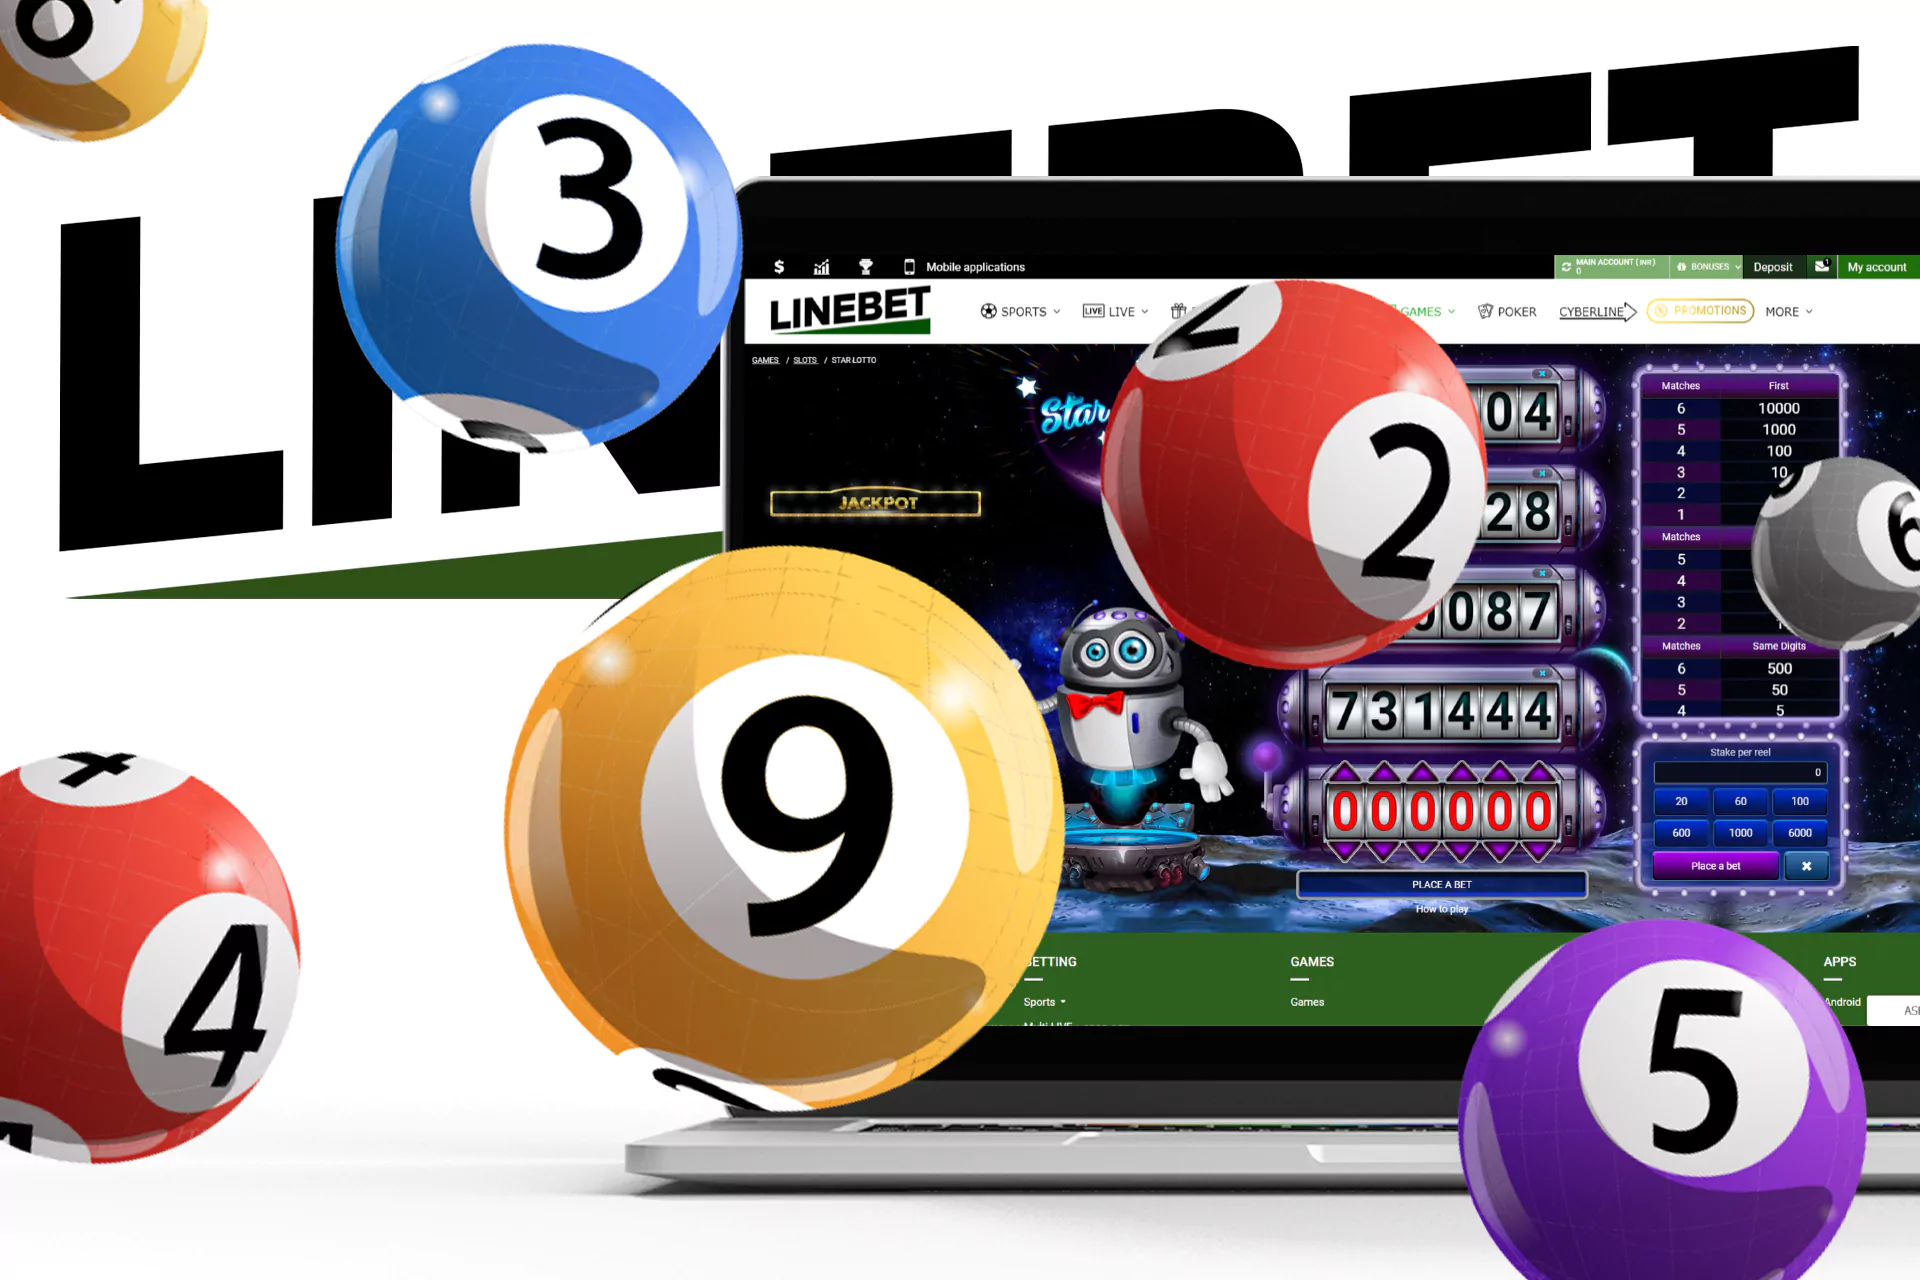 At Linebet you can play lotteries which are also not prohibited in Bangladesh.